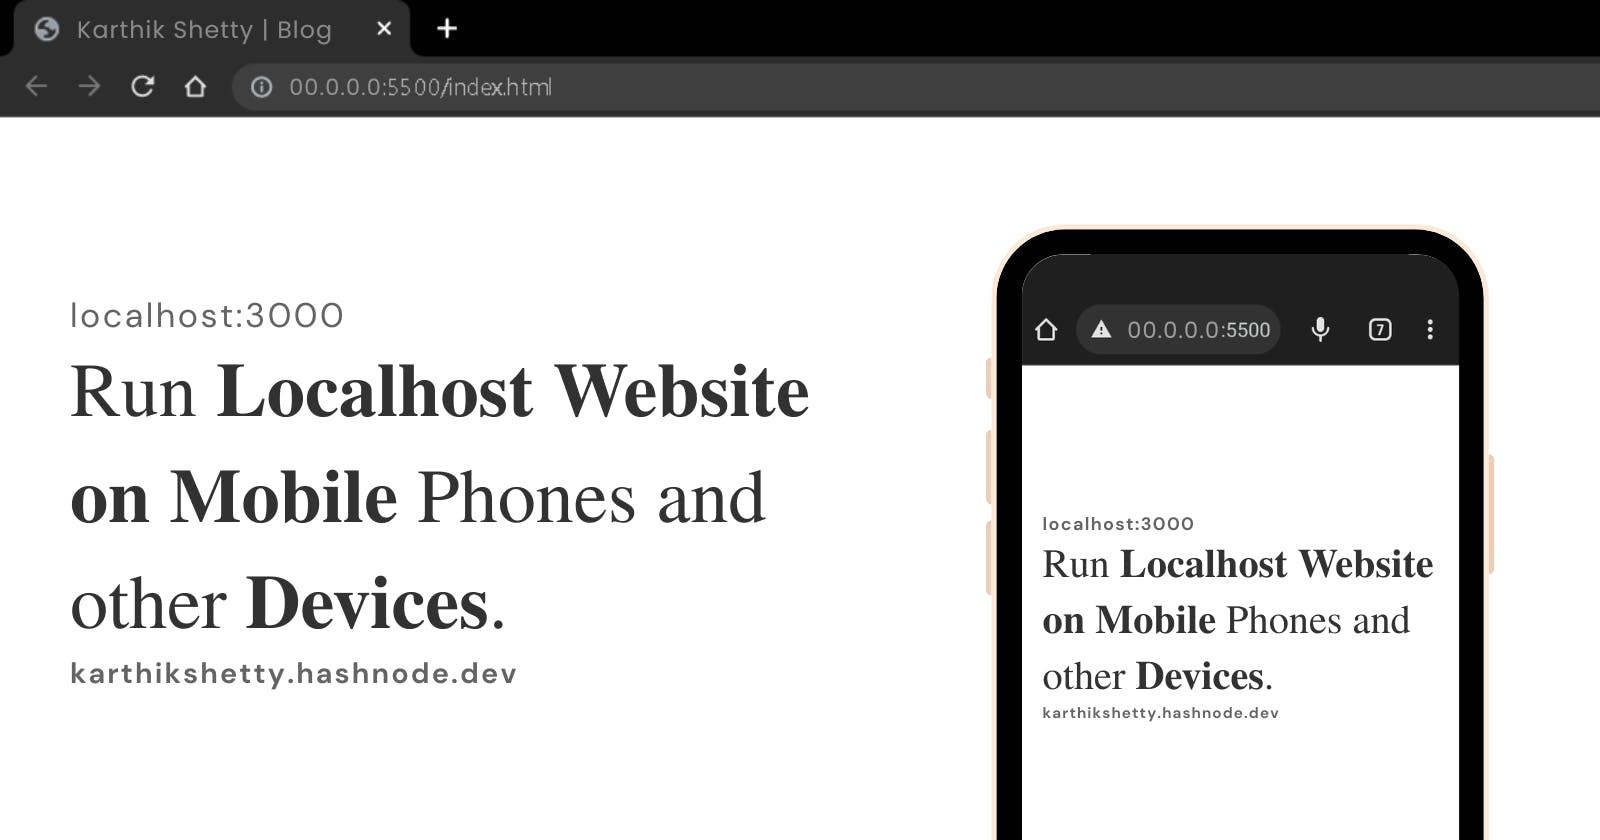 Run Localhost Website on Mobile Phones and other Devices.